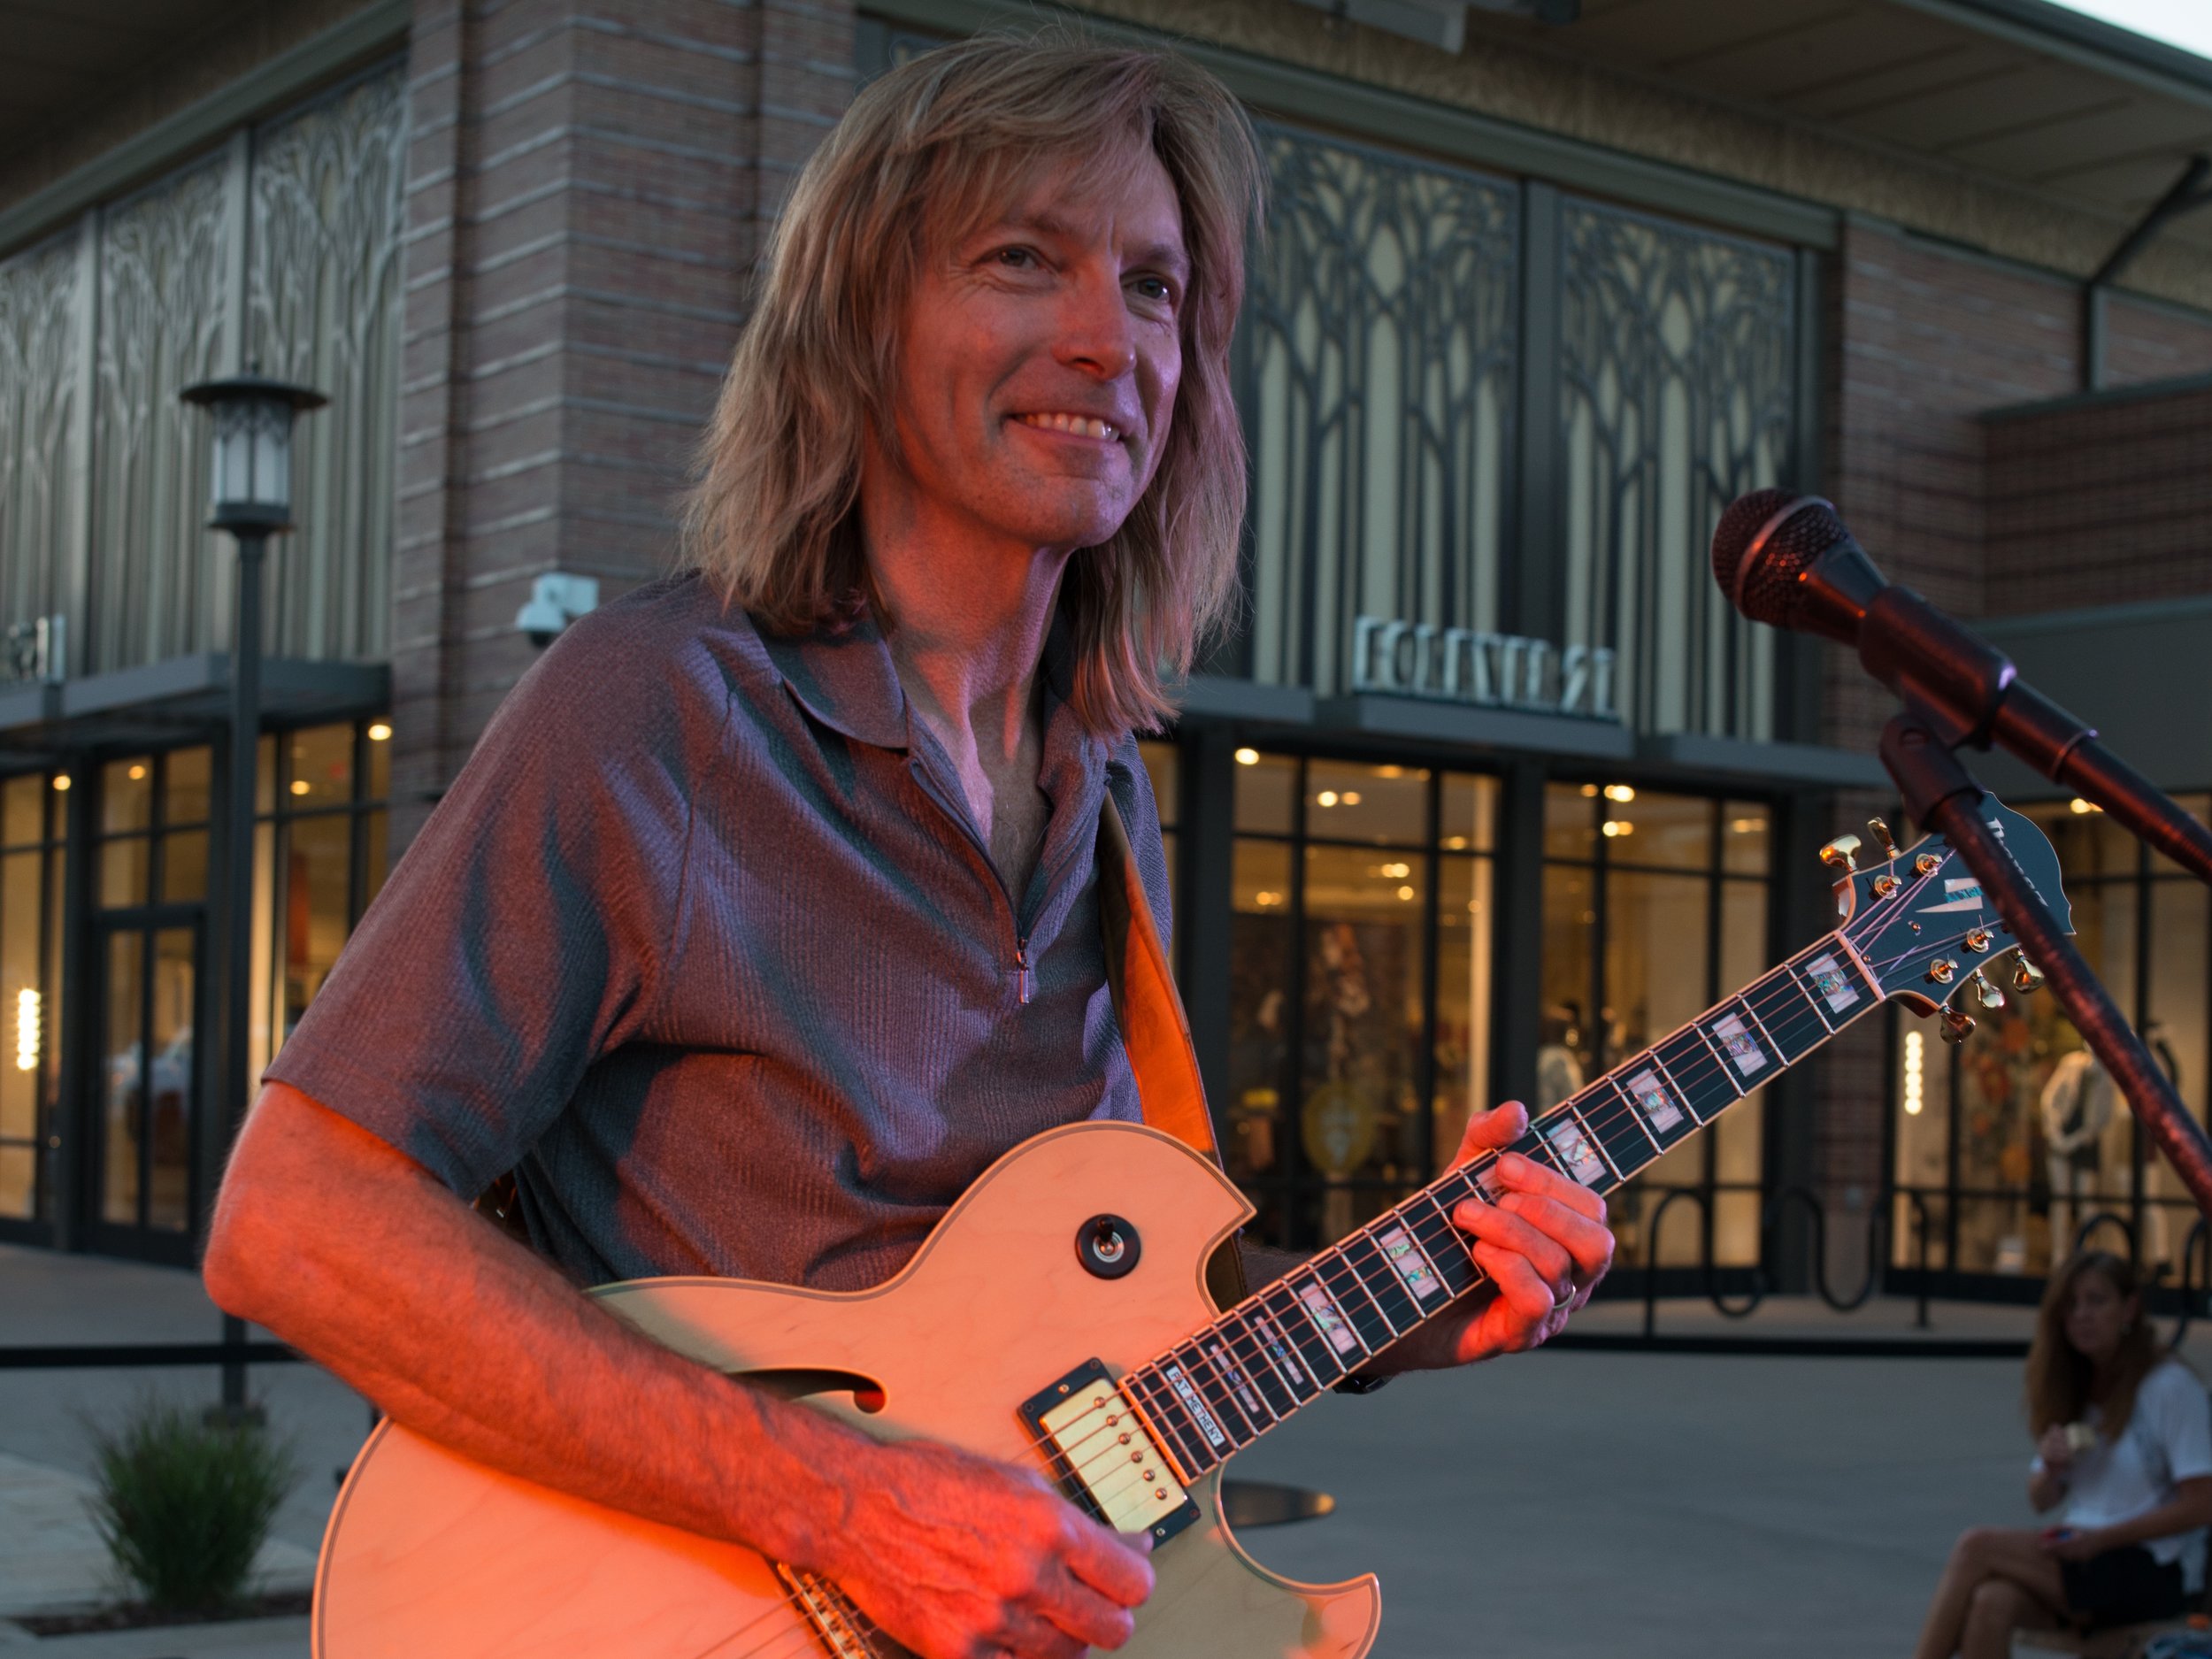    Bill Sickles performing solo guitar at The Orchard Town Center in Westminster Colorado   